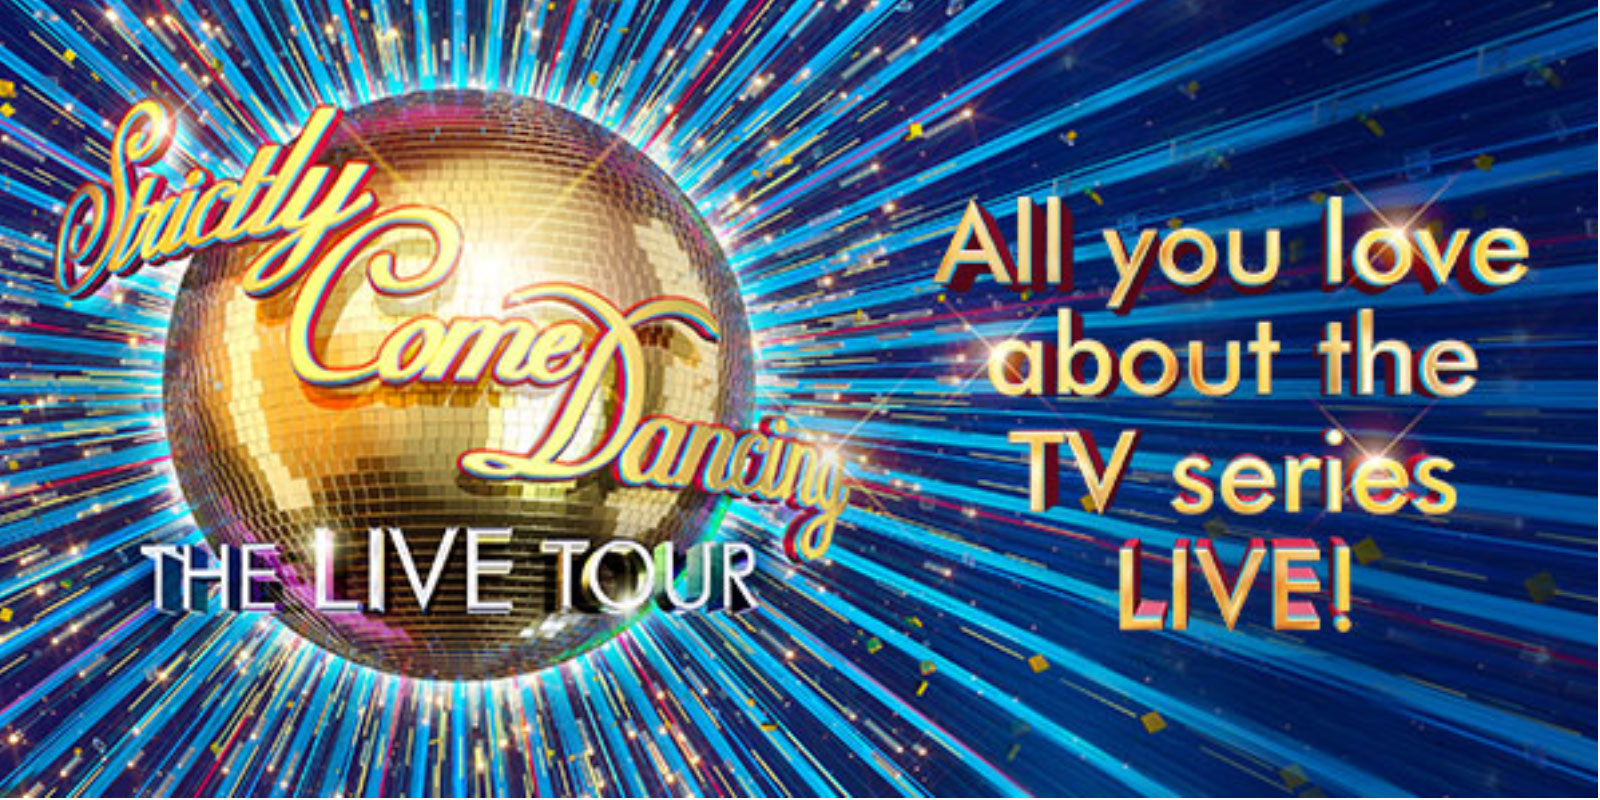 strictly come dancing tour 2023 manchester tickets